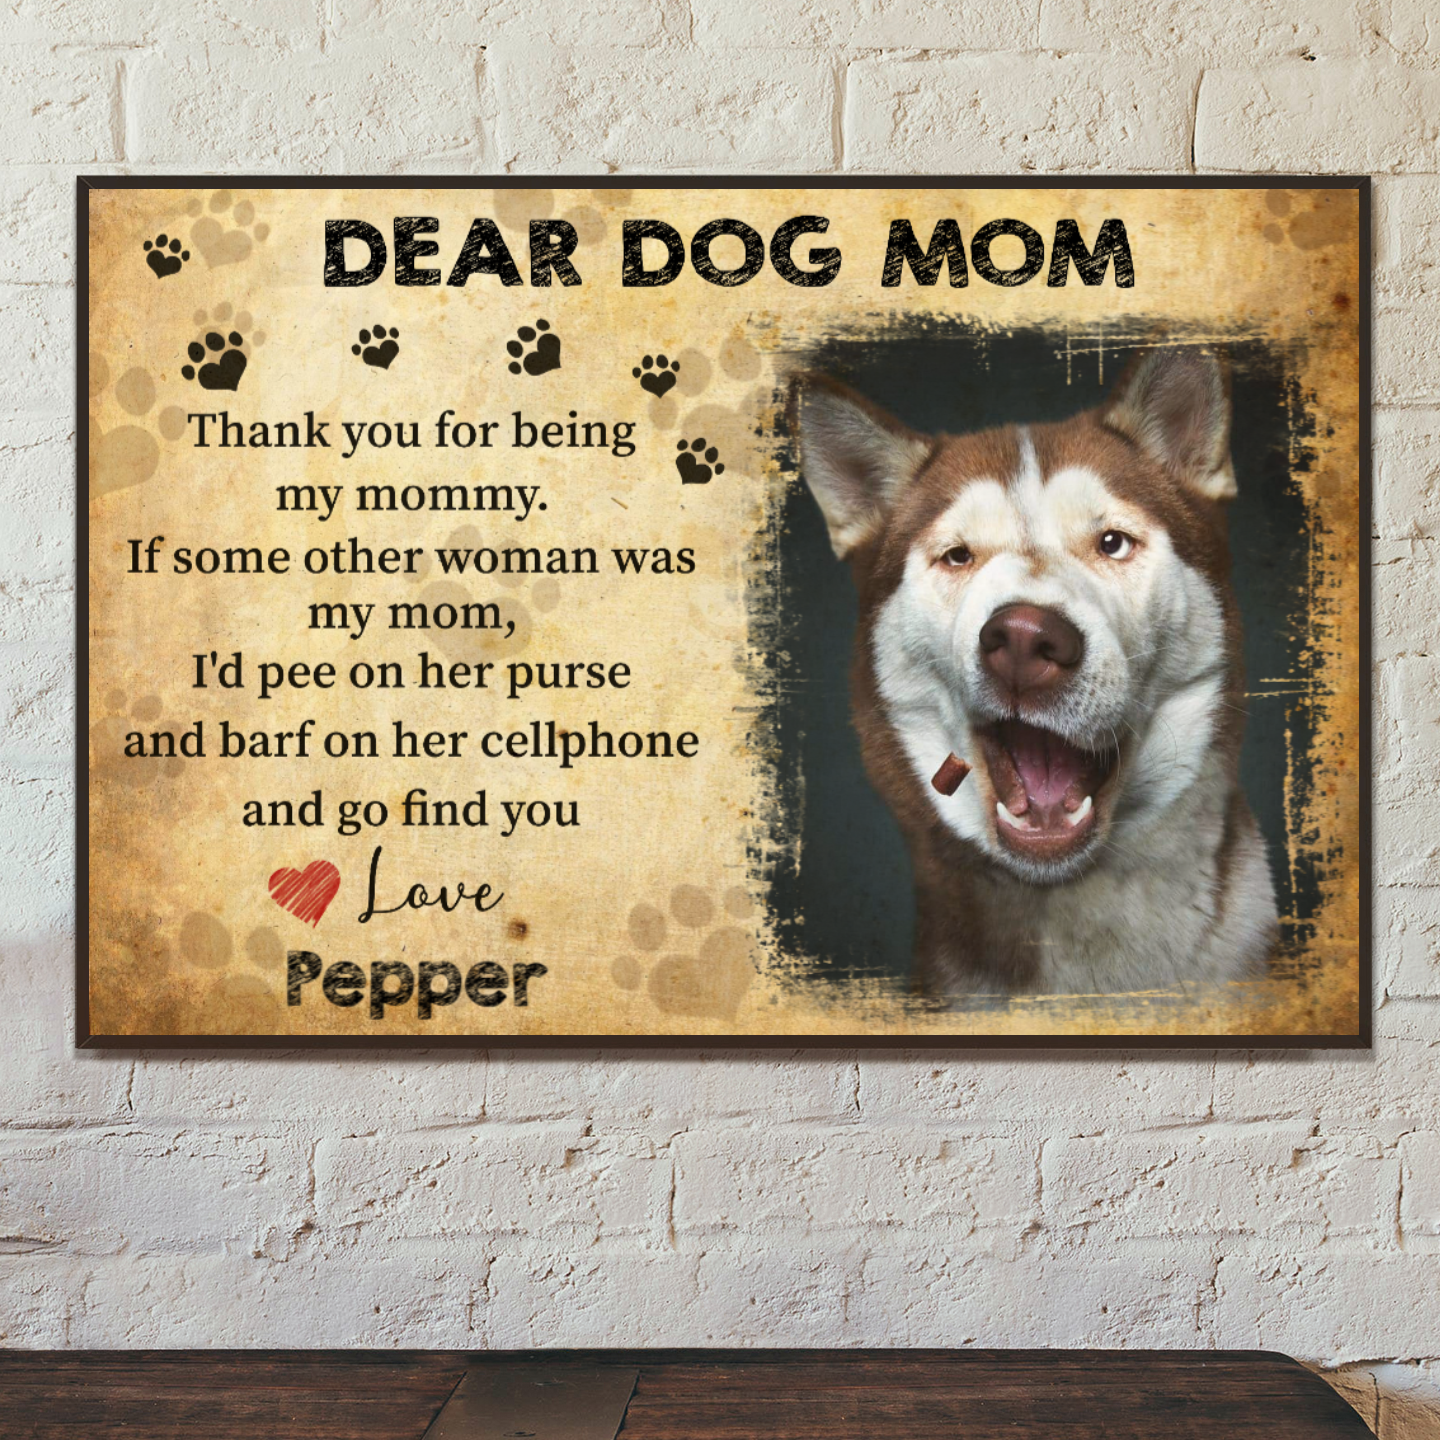 Ciaocustom Poster/Framed Canvas/Unframed Canvas, Custom Dog Image/Name/Background/Text, Gifts For Dog Lovers, Dear Dog Mom